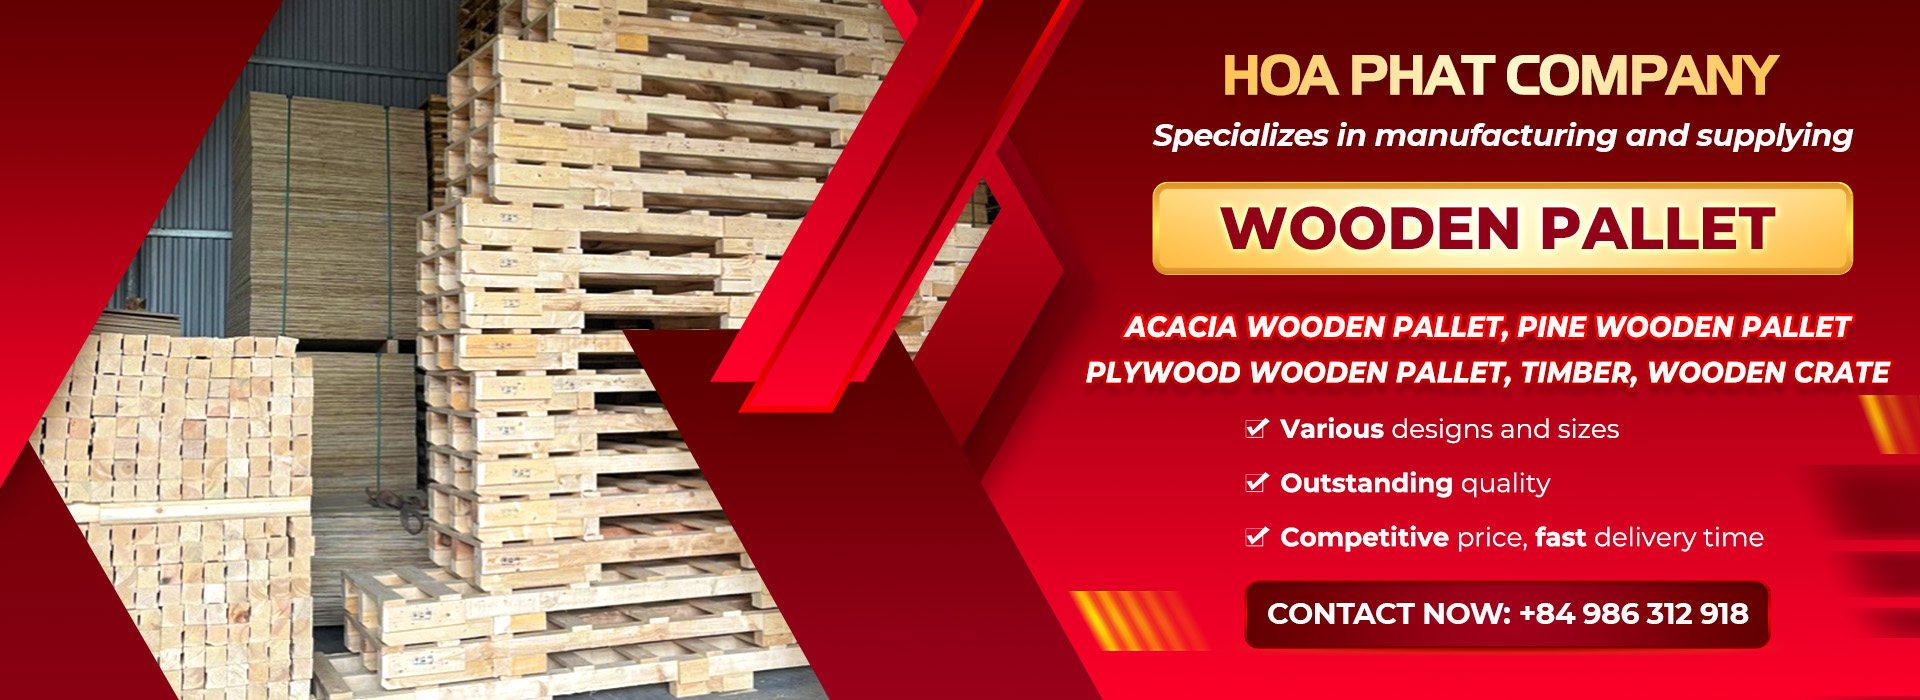 HOA PHAT WOODEN PALLET ONE MEMBER COMPANY LIMITED